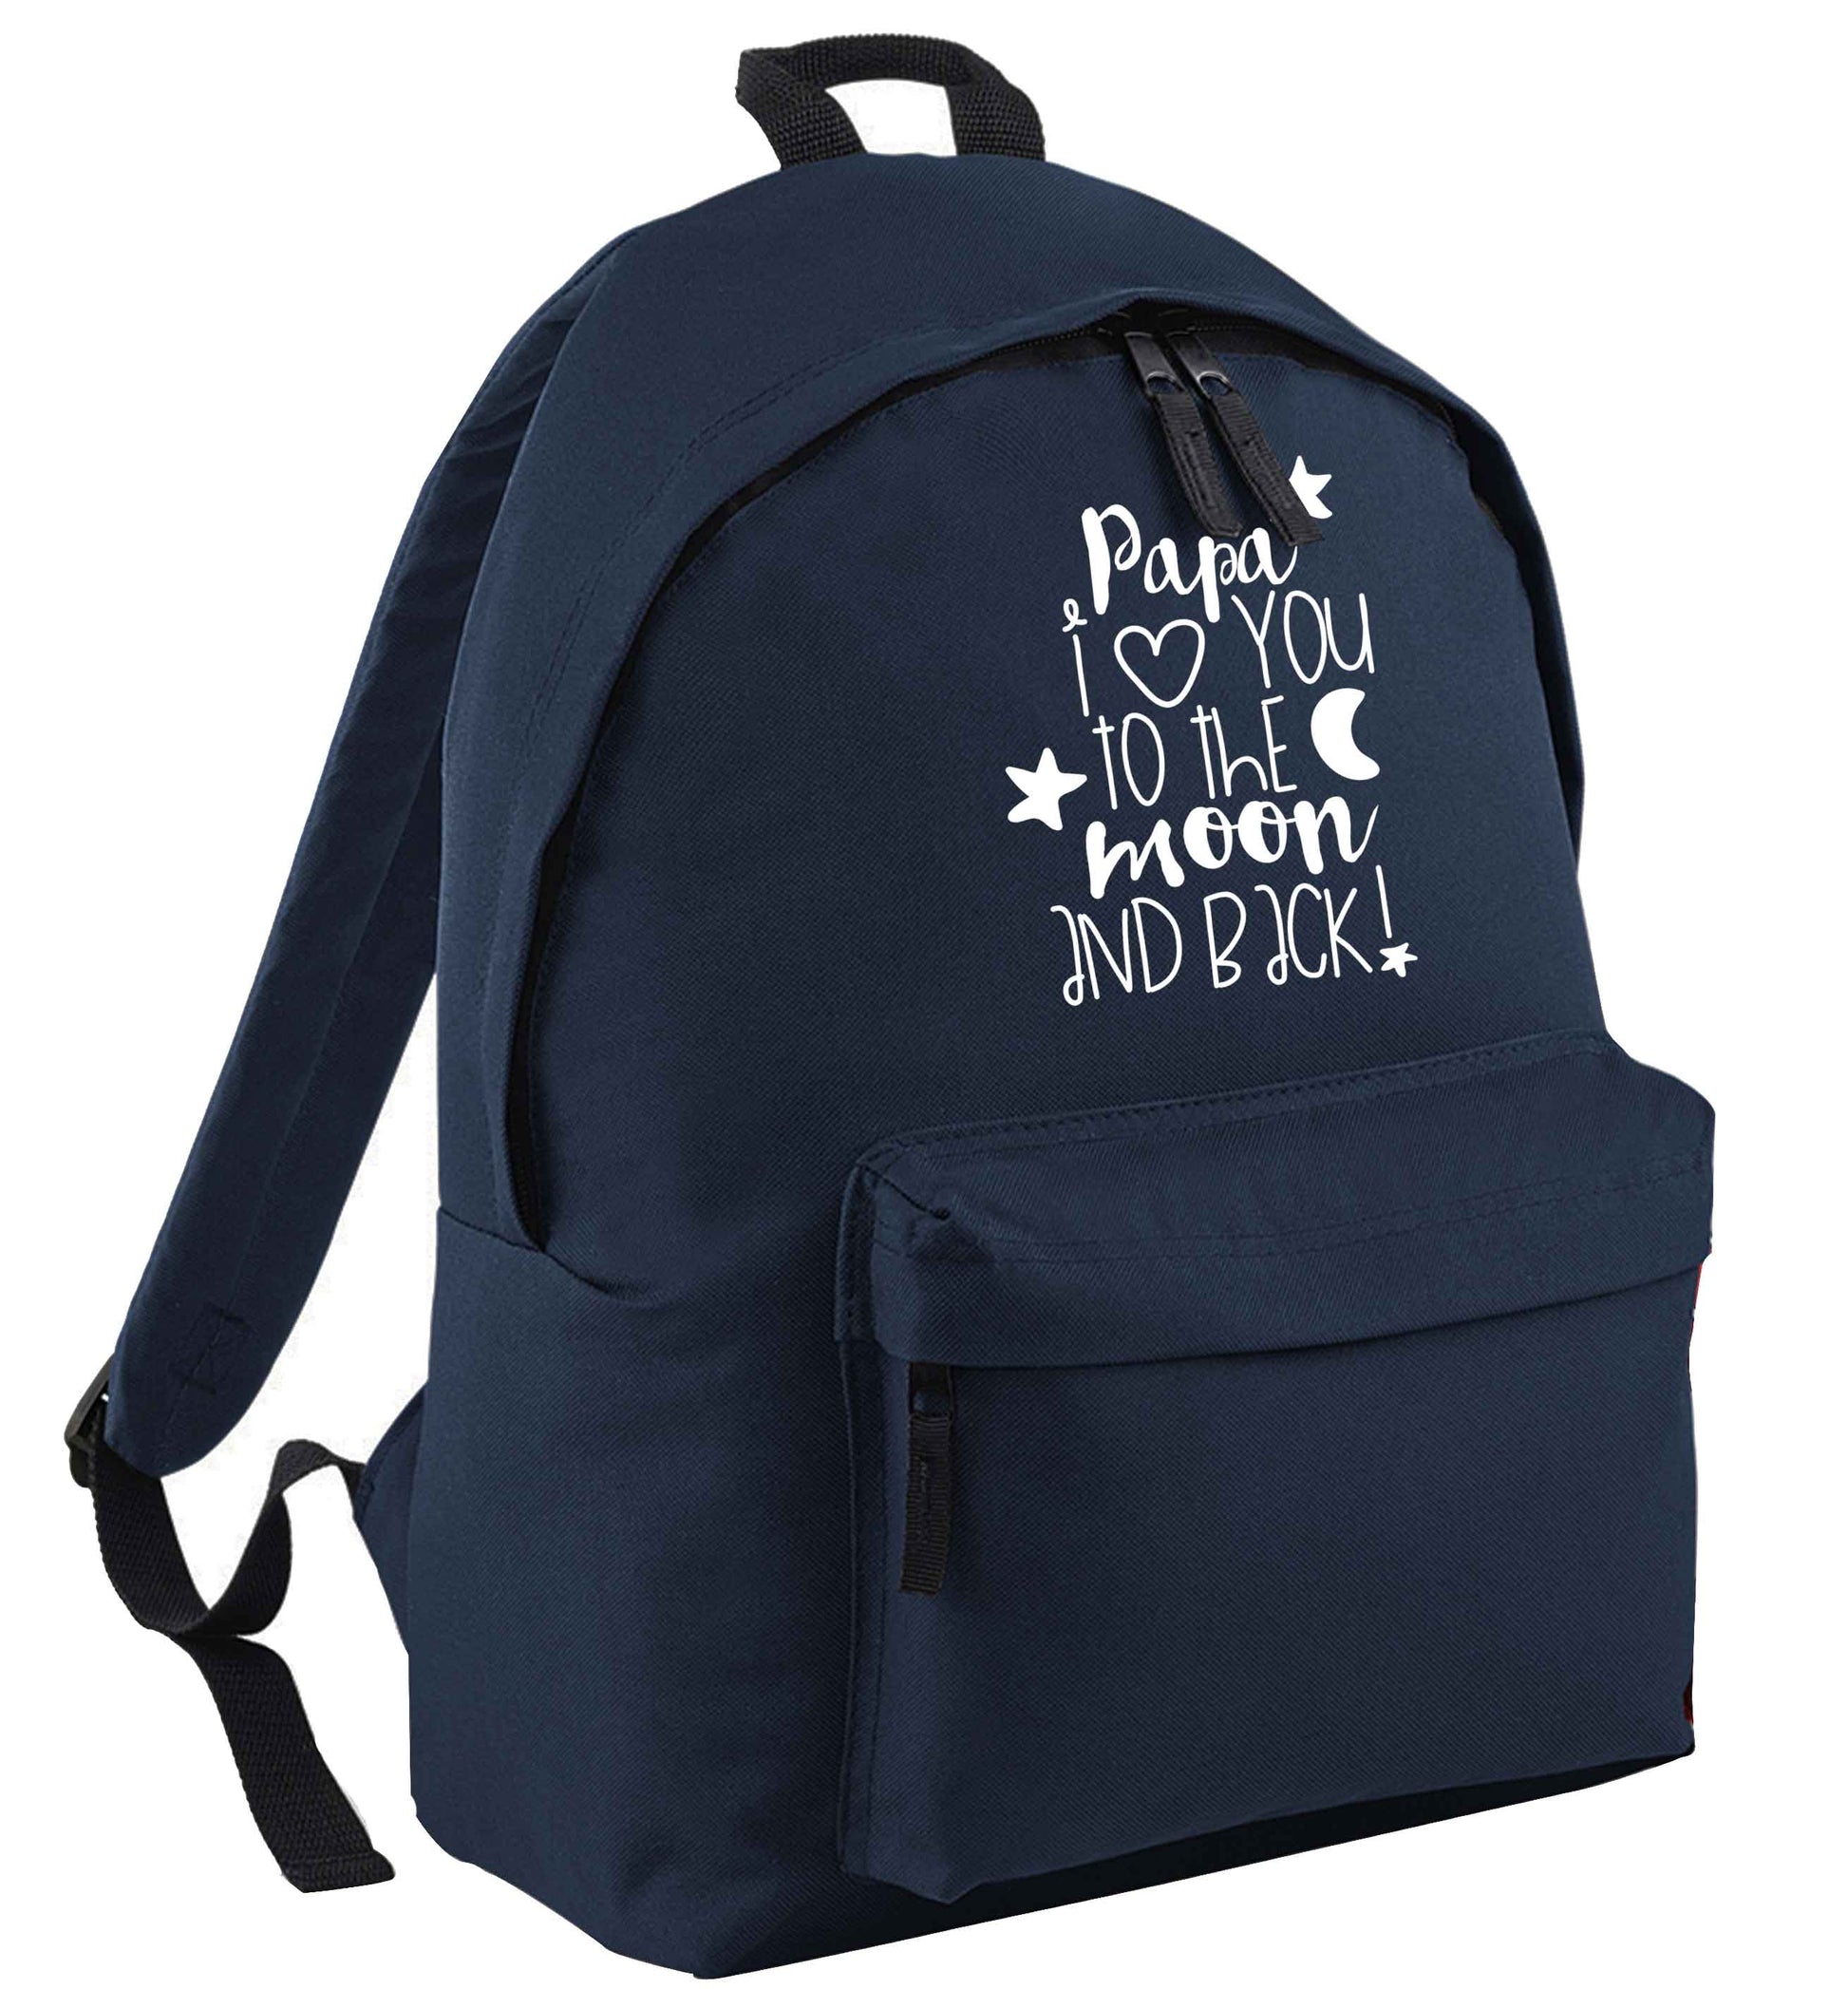 Papa I love you to the moon and back navy adults backpack